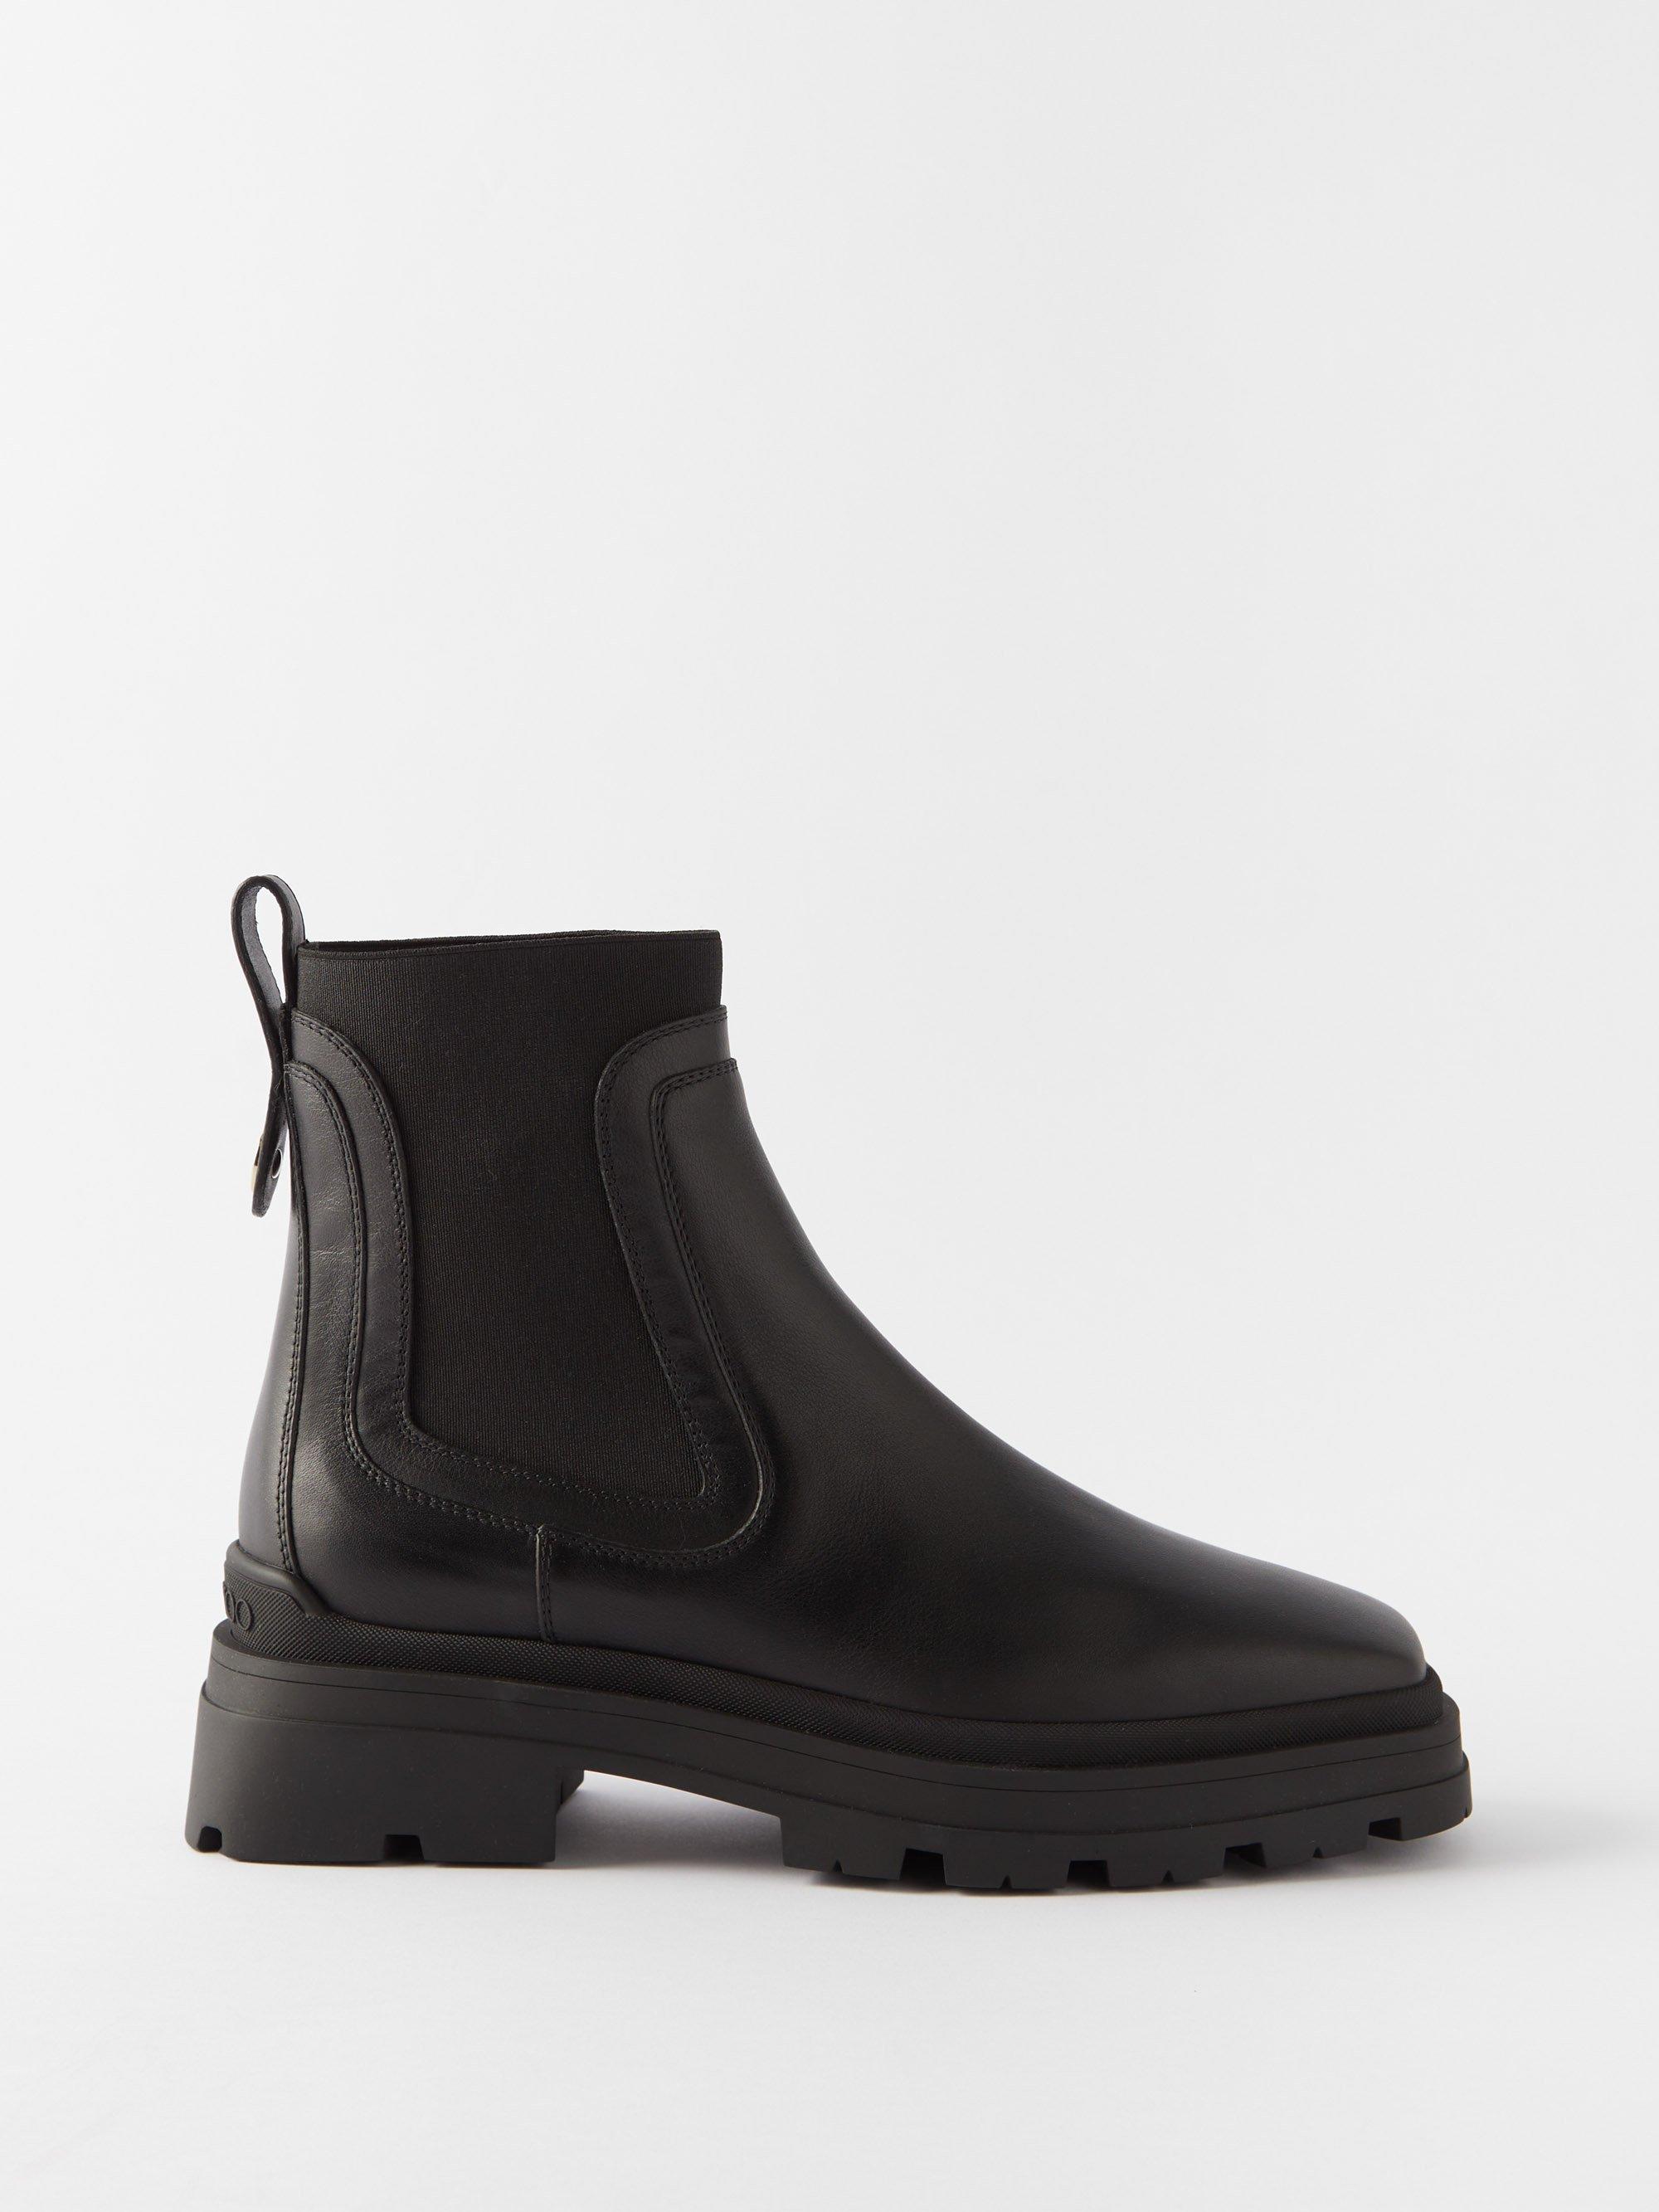 Jimmy Choo Veronique 45 Leather Ankle Boots in Black | Lyst